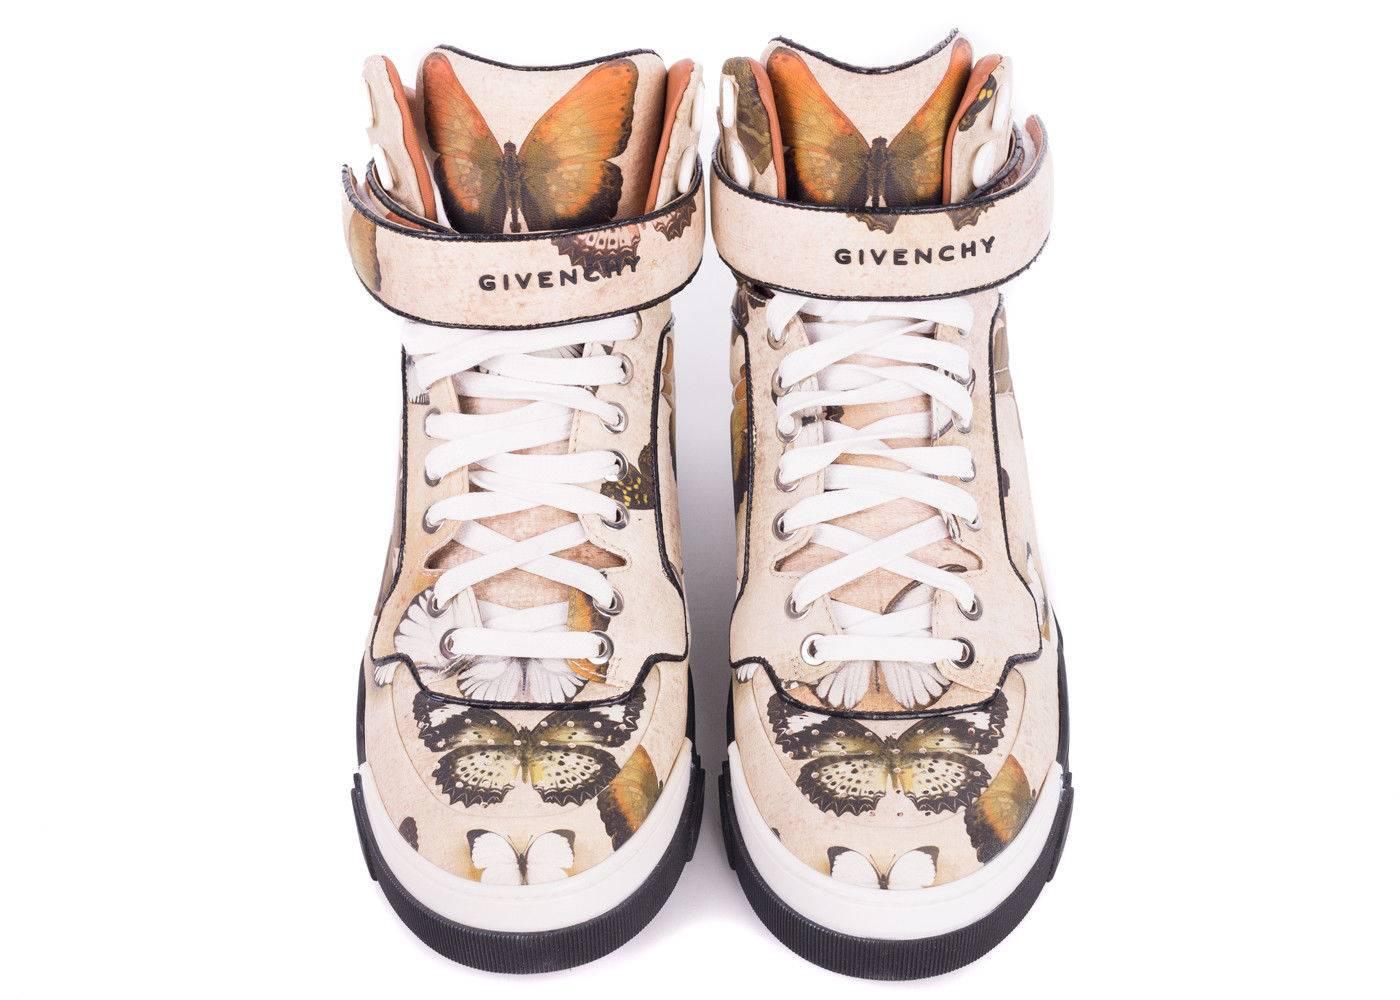 Givenchy's Tyson High Top Sneaker is this season's must have. This sneaker features Givenchy's Butterfly Print, pure genuine leather, and and rich black leather trimming. You can pair these sneakers with olive green leather pants and a moto jacket